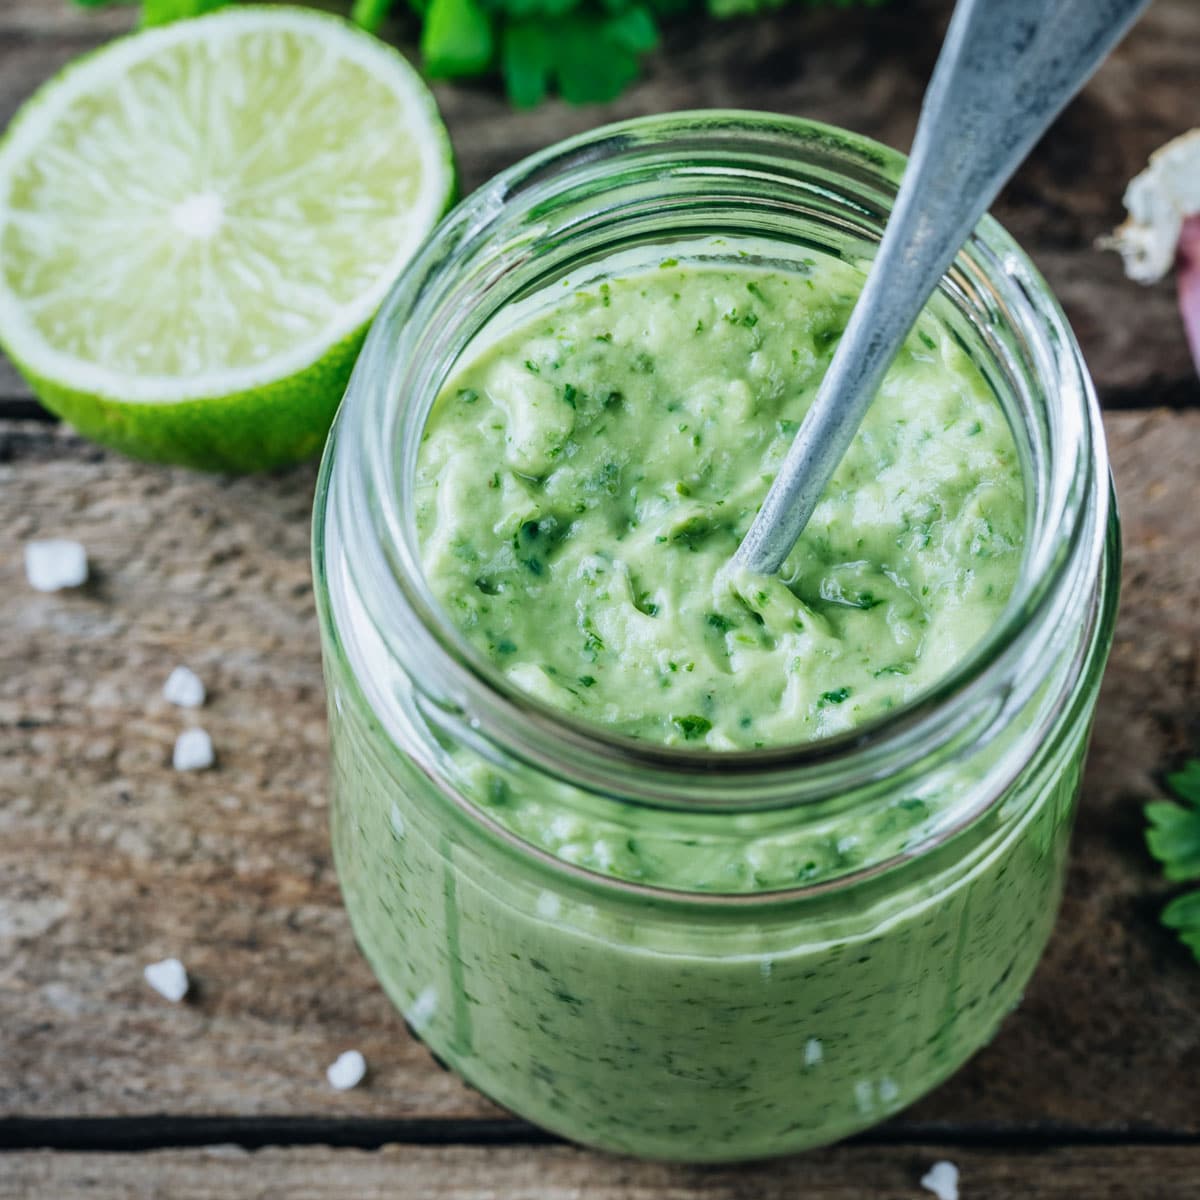 Creamy cilantro dressing" is a flavorful, easy-to-make dressing that uniquely tastes any dish. Its origins can be traced back to El Pollo Loco, and it has become a staple in many households.